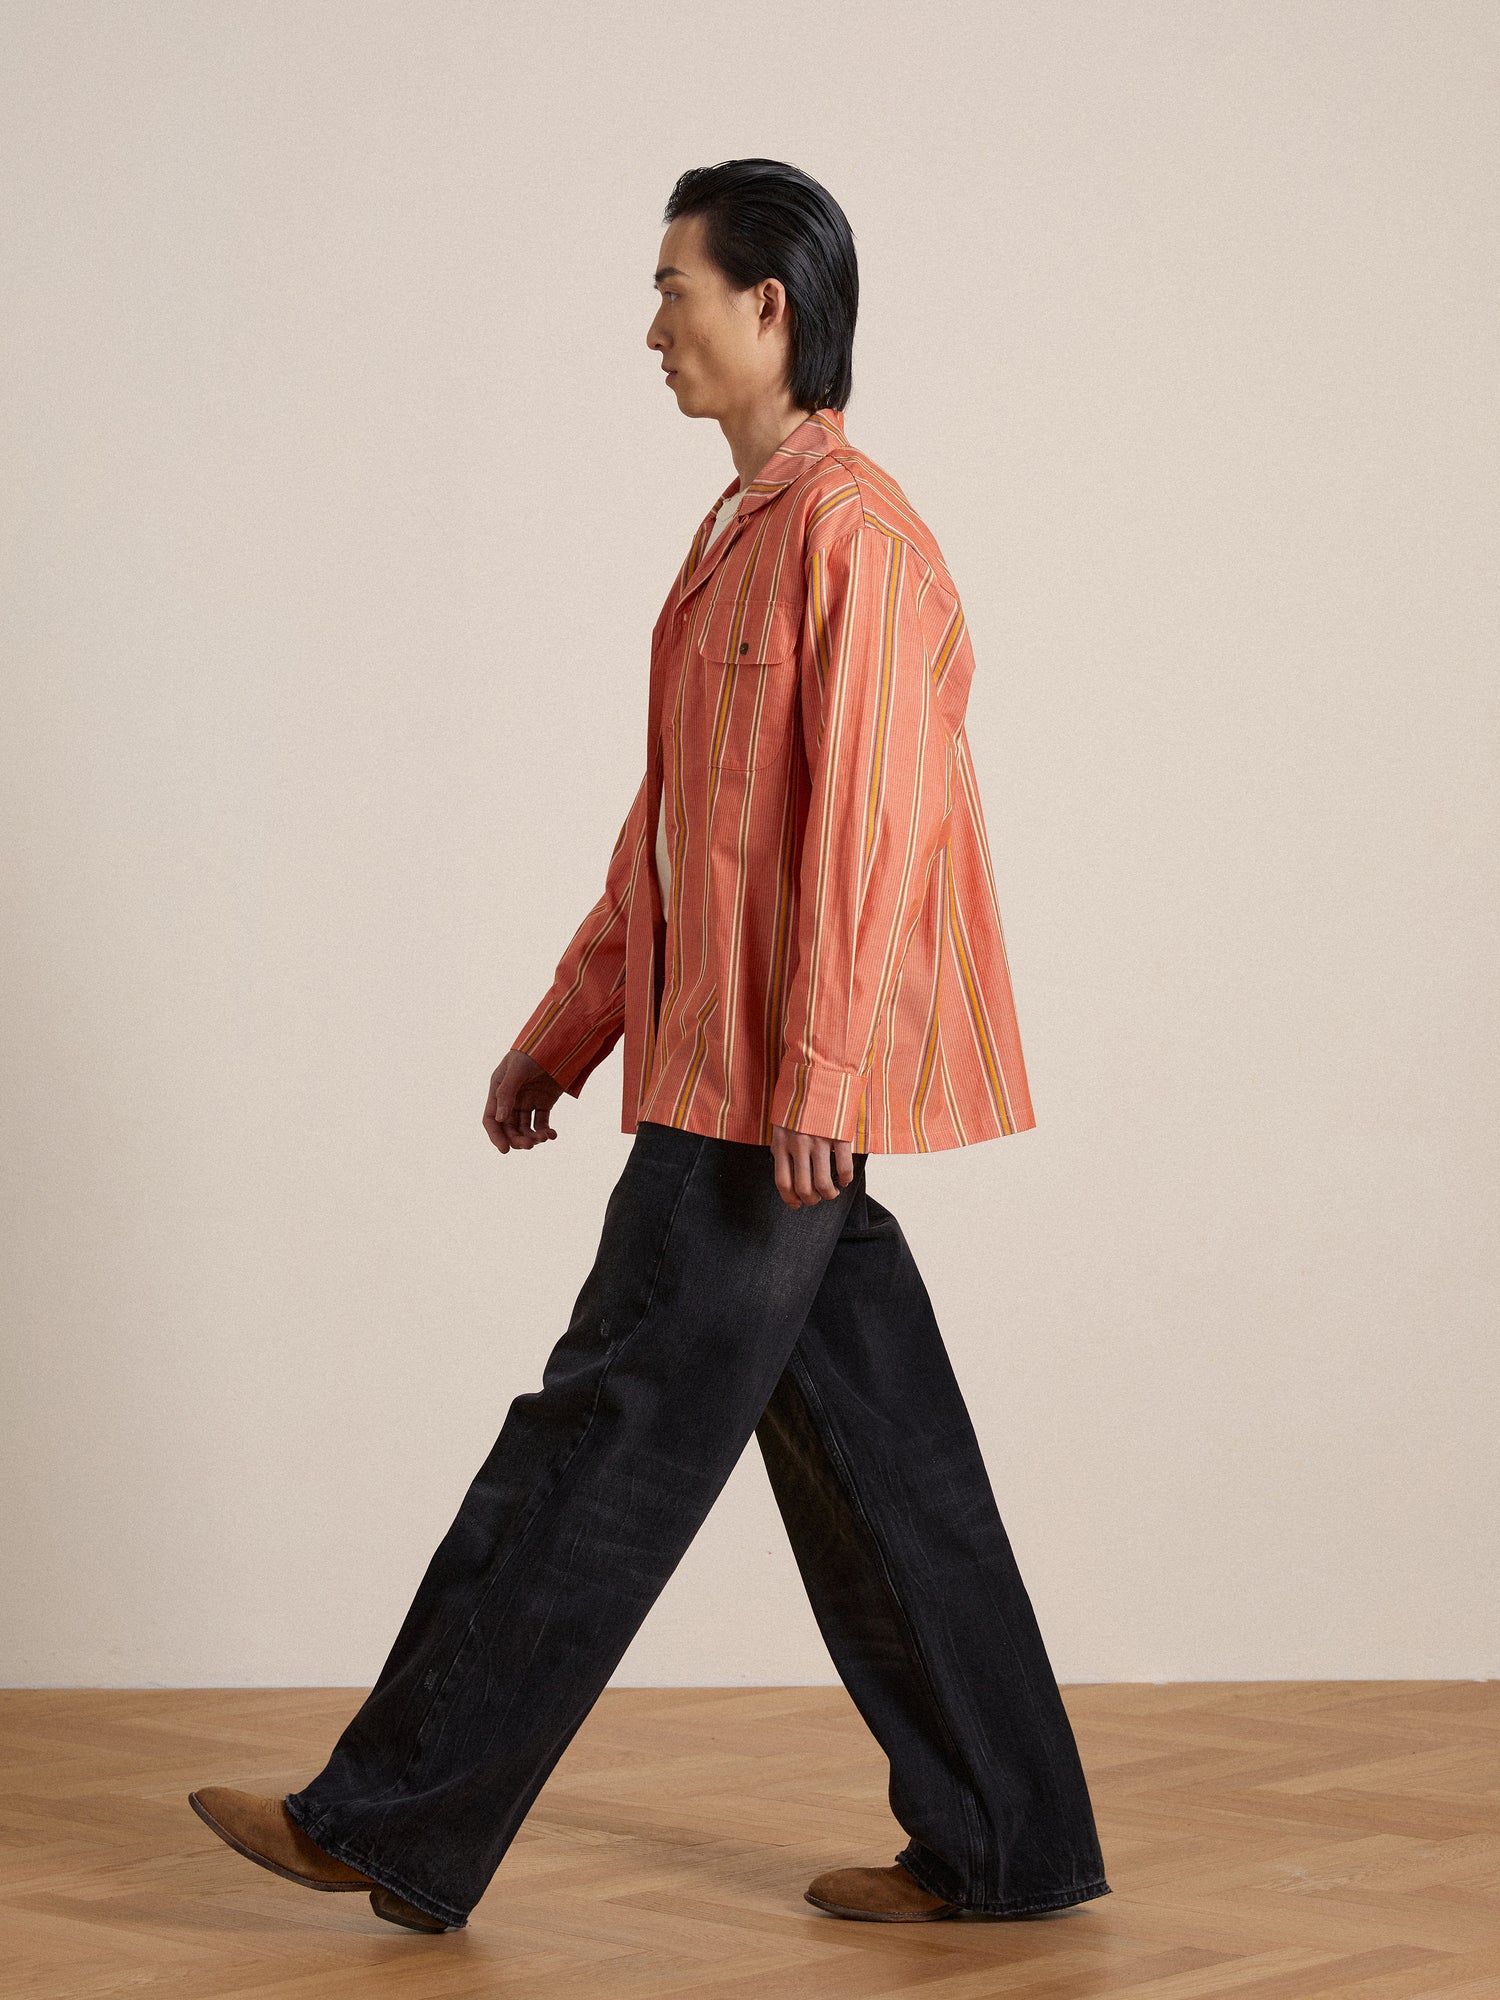 A man in a Found Stripe Citrus LS Camp Shirt with classic appeal walking across a wooden floor.